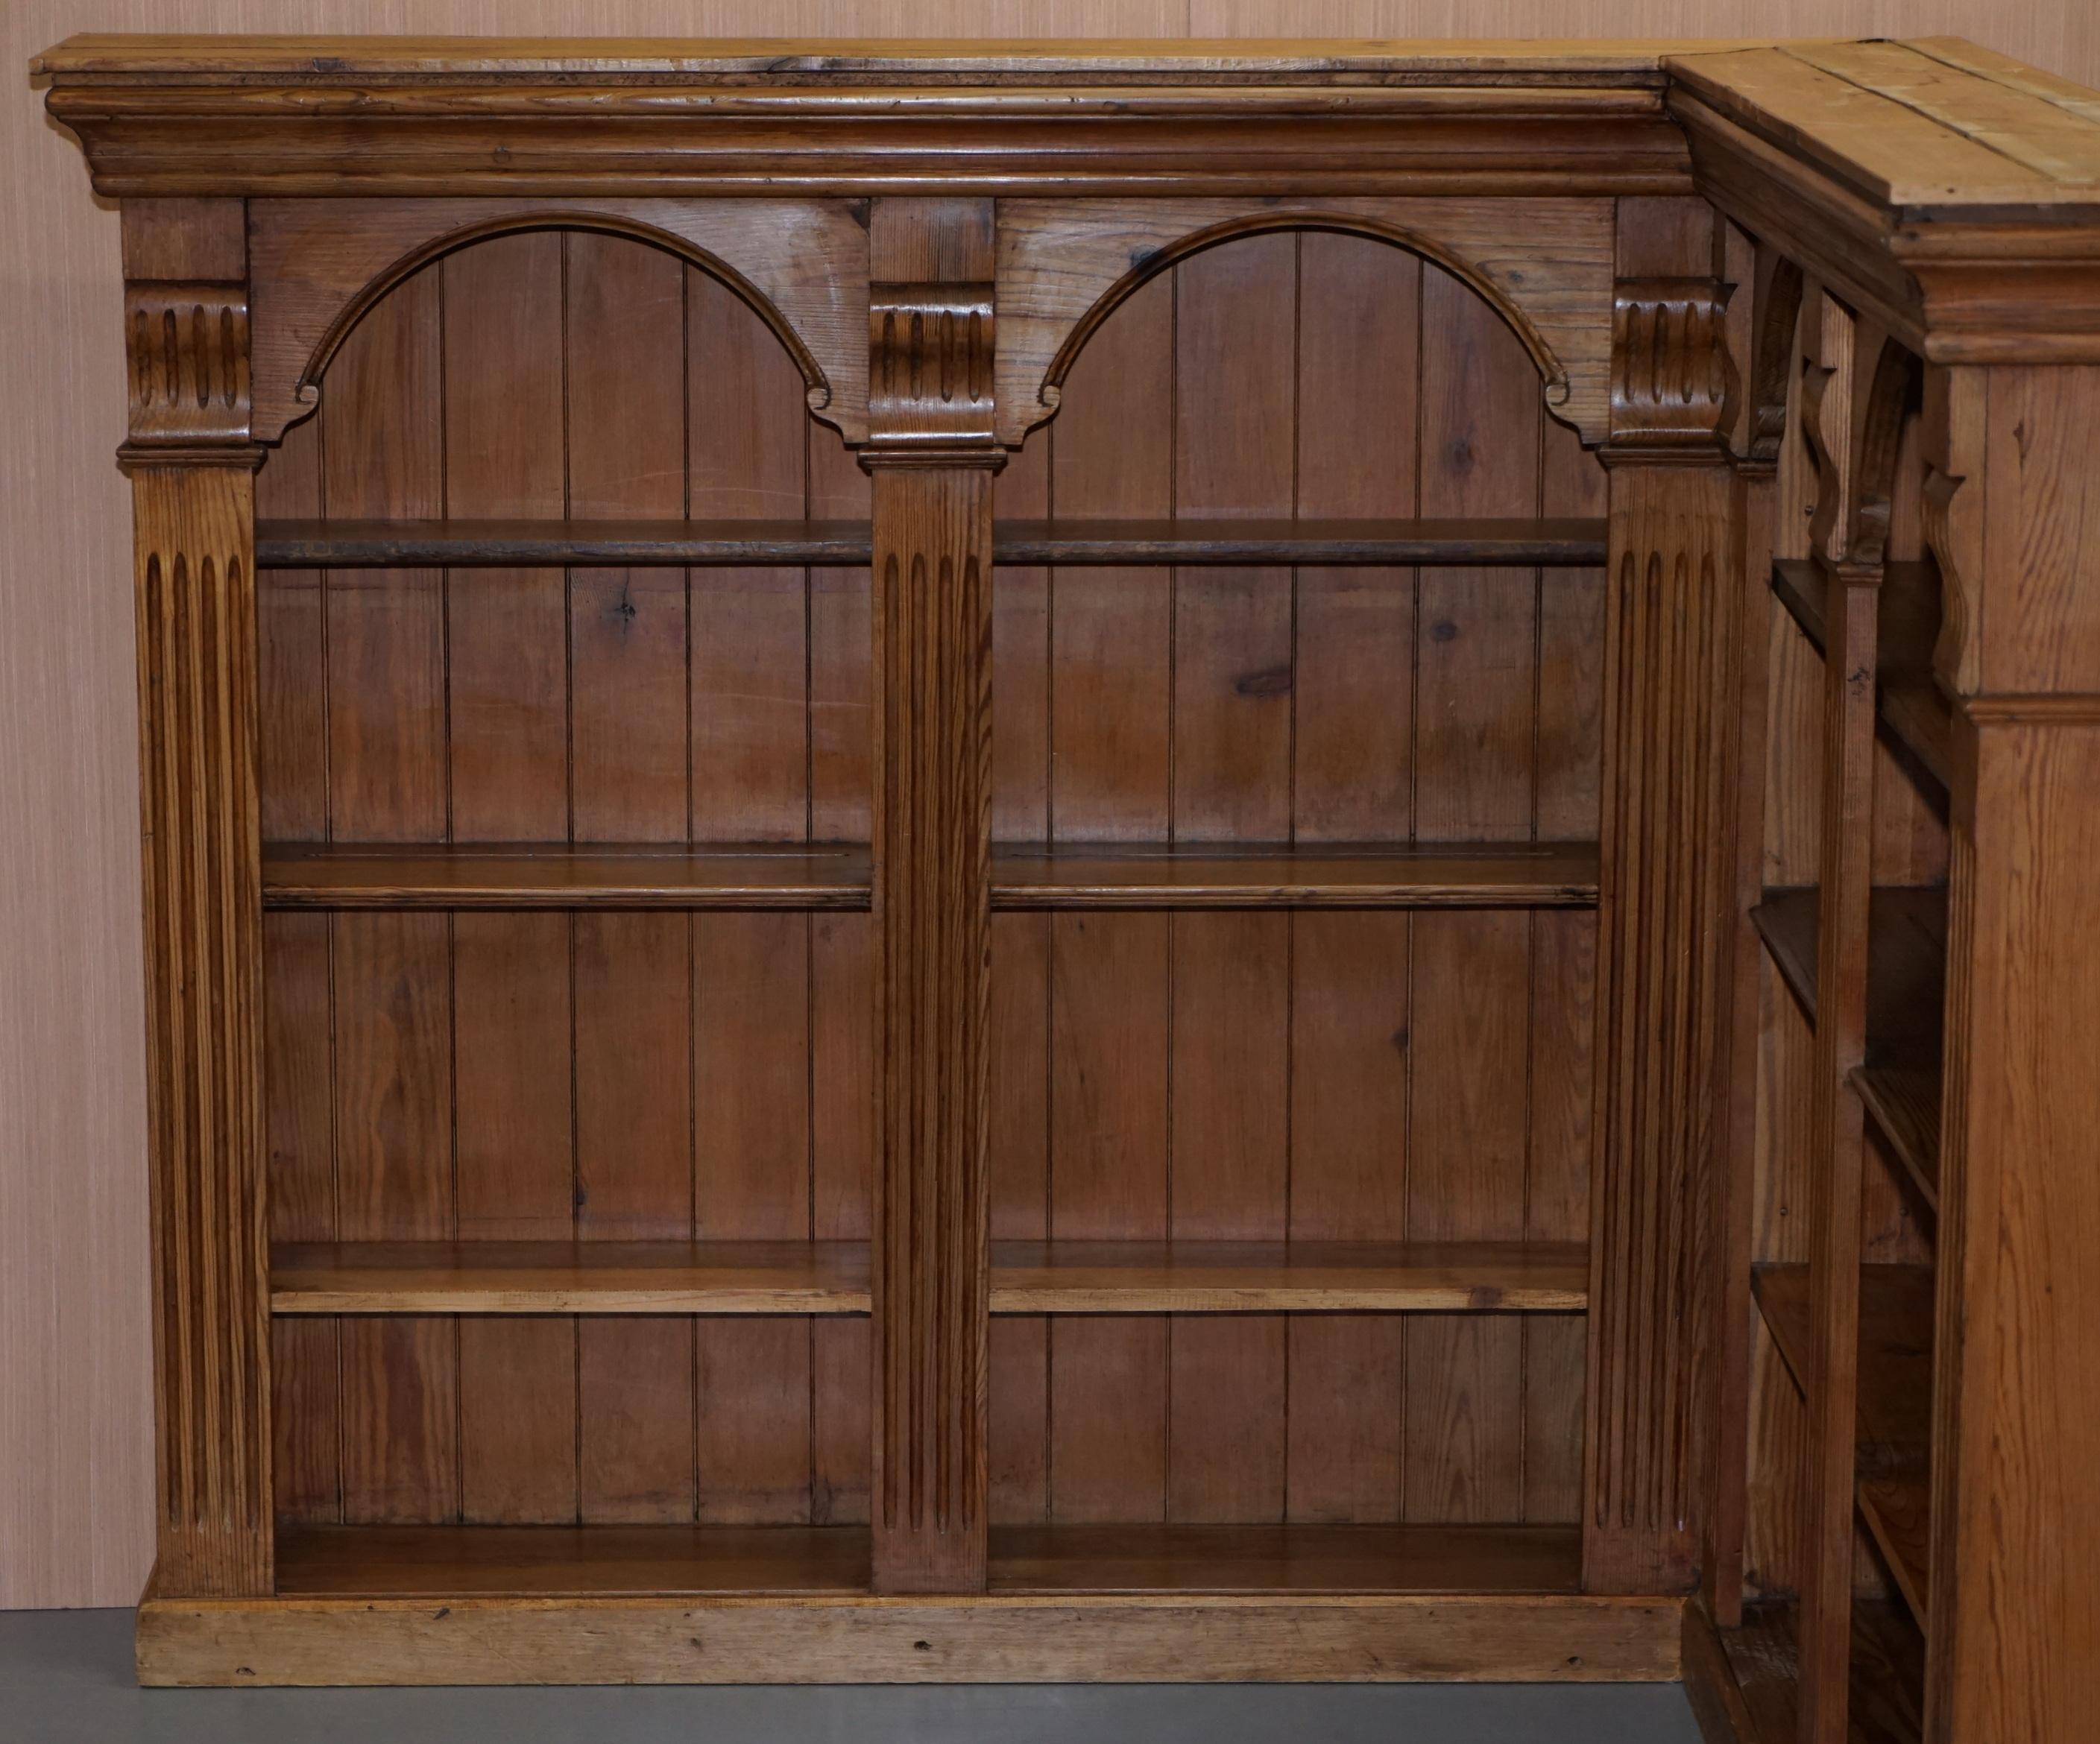 We are delighted to offer for sale this lovely circa 1950s solid English pine corner bookcase

A very good looking well made and functional piece of furniture. I’ve not seen one like this before, it has nicely carved detailing and arches tops. The